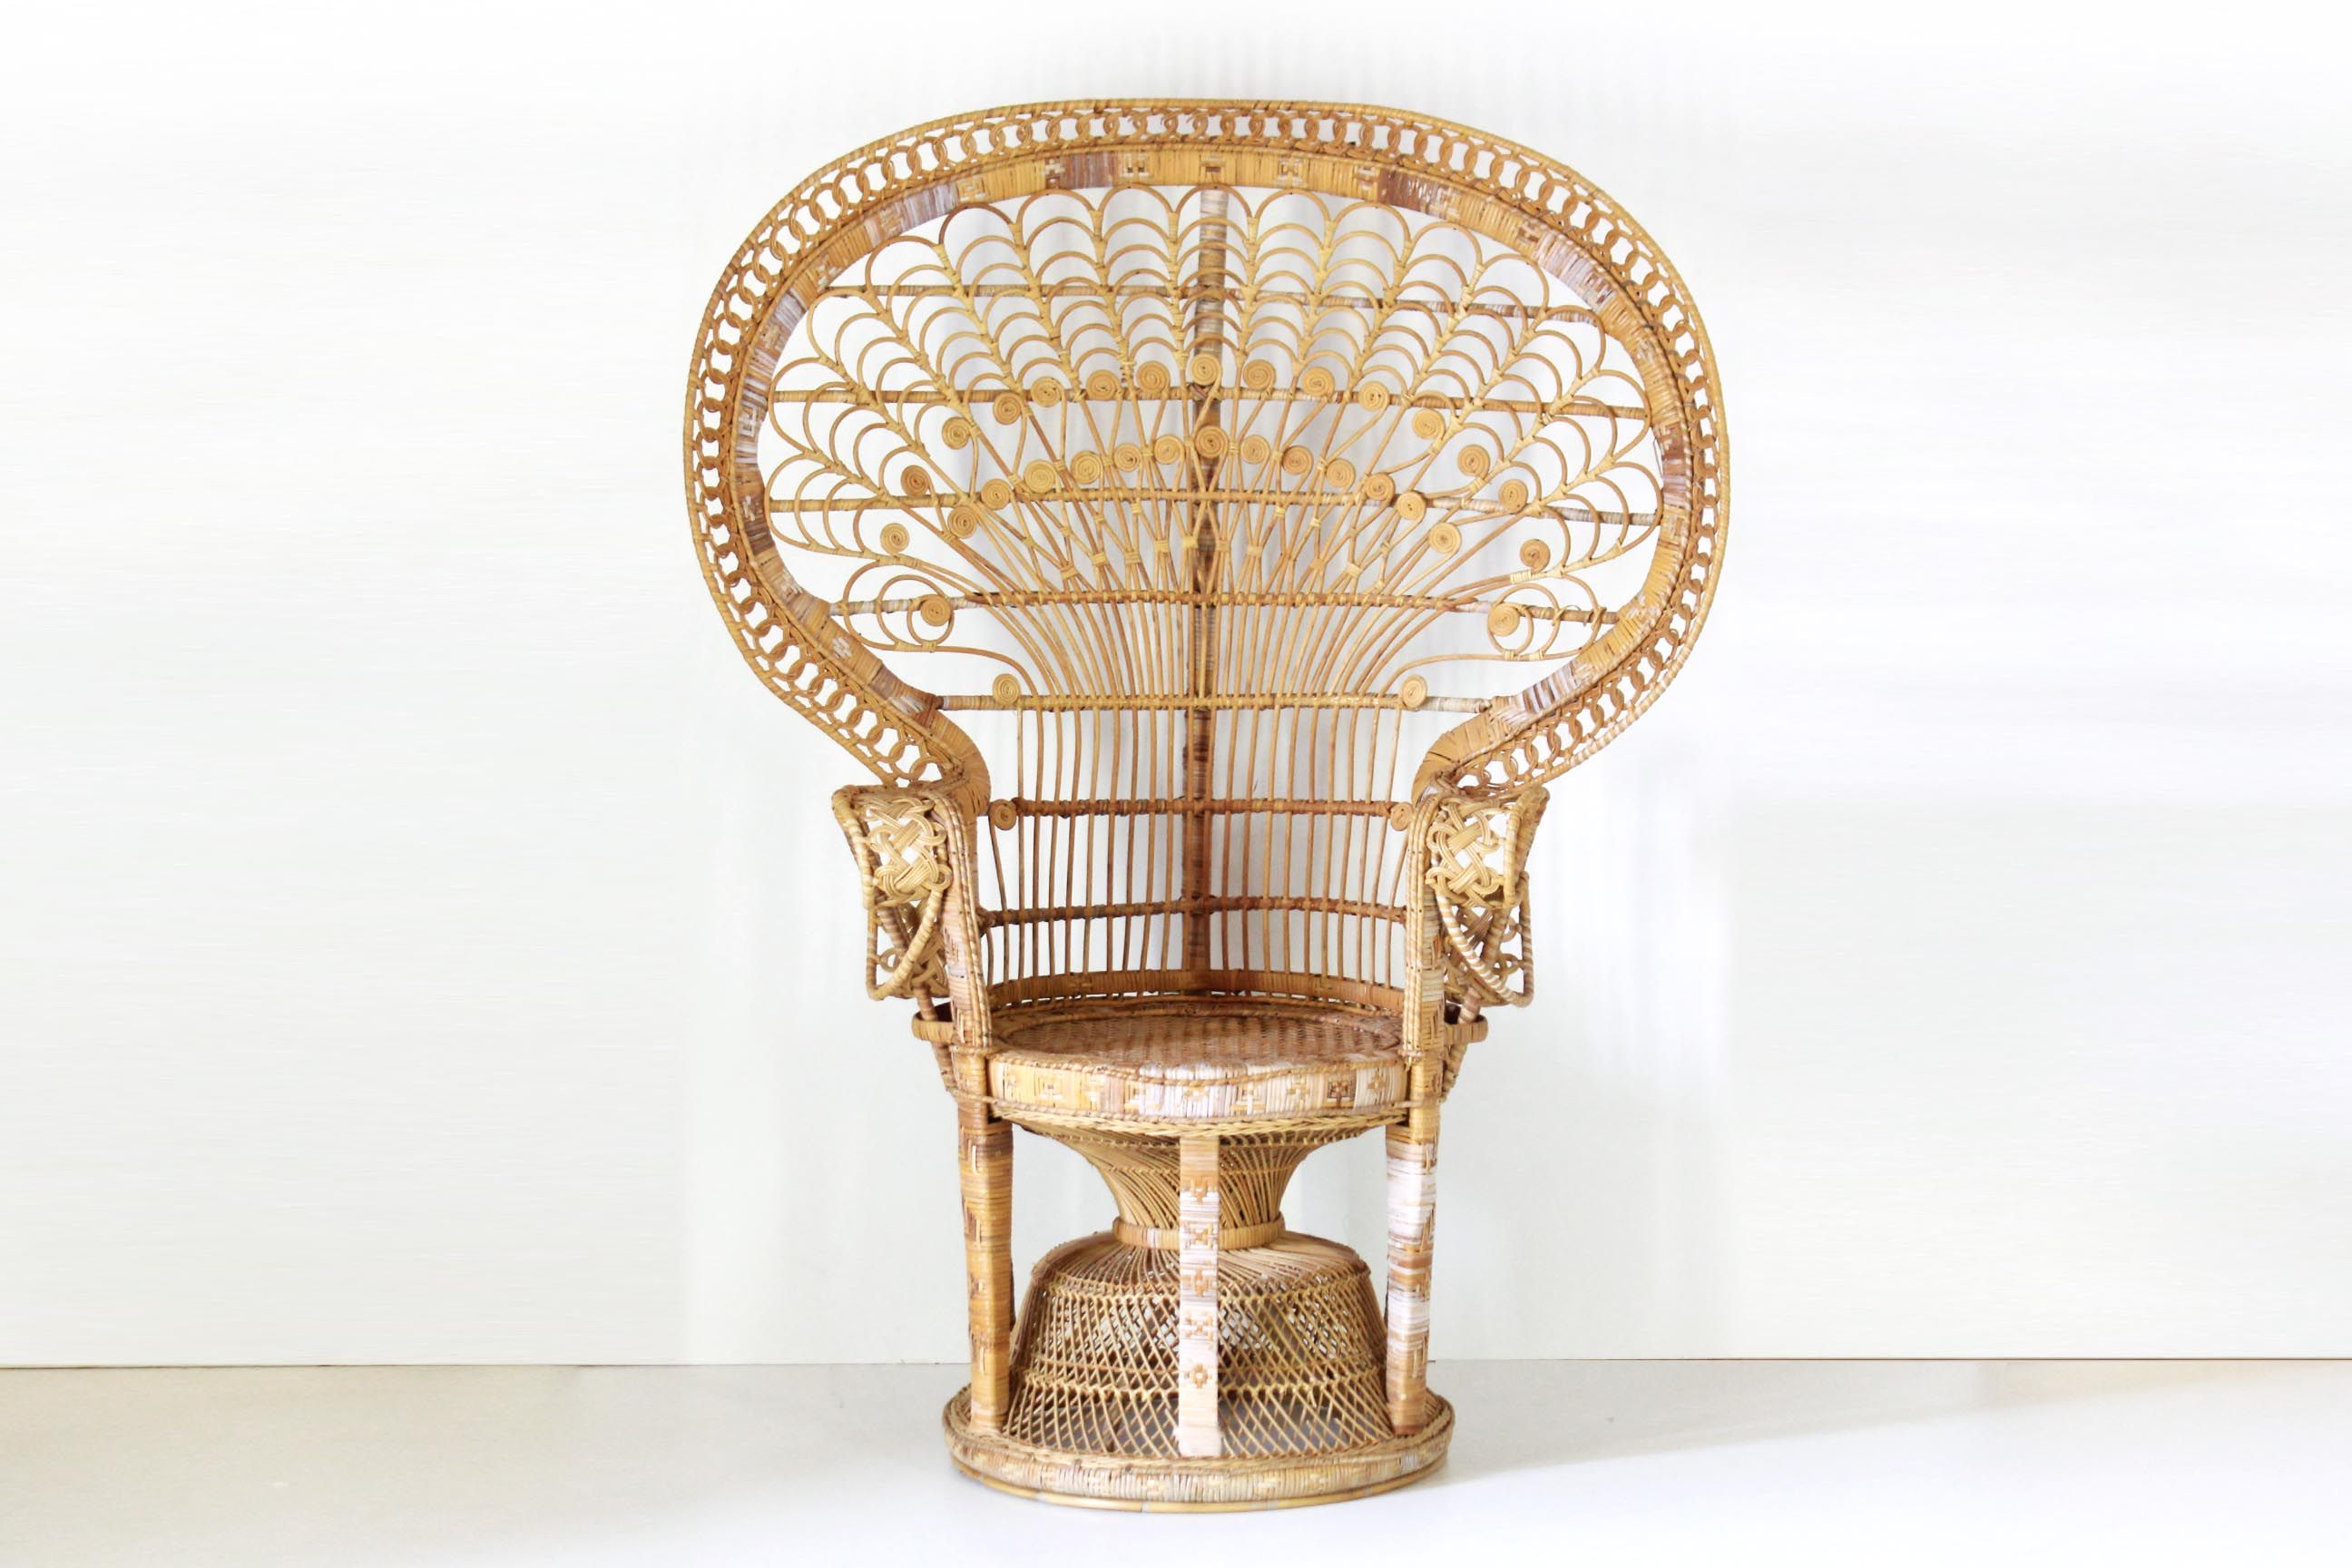 Stupendous Collections Of Vintage Peacock Chair Concept